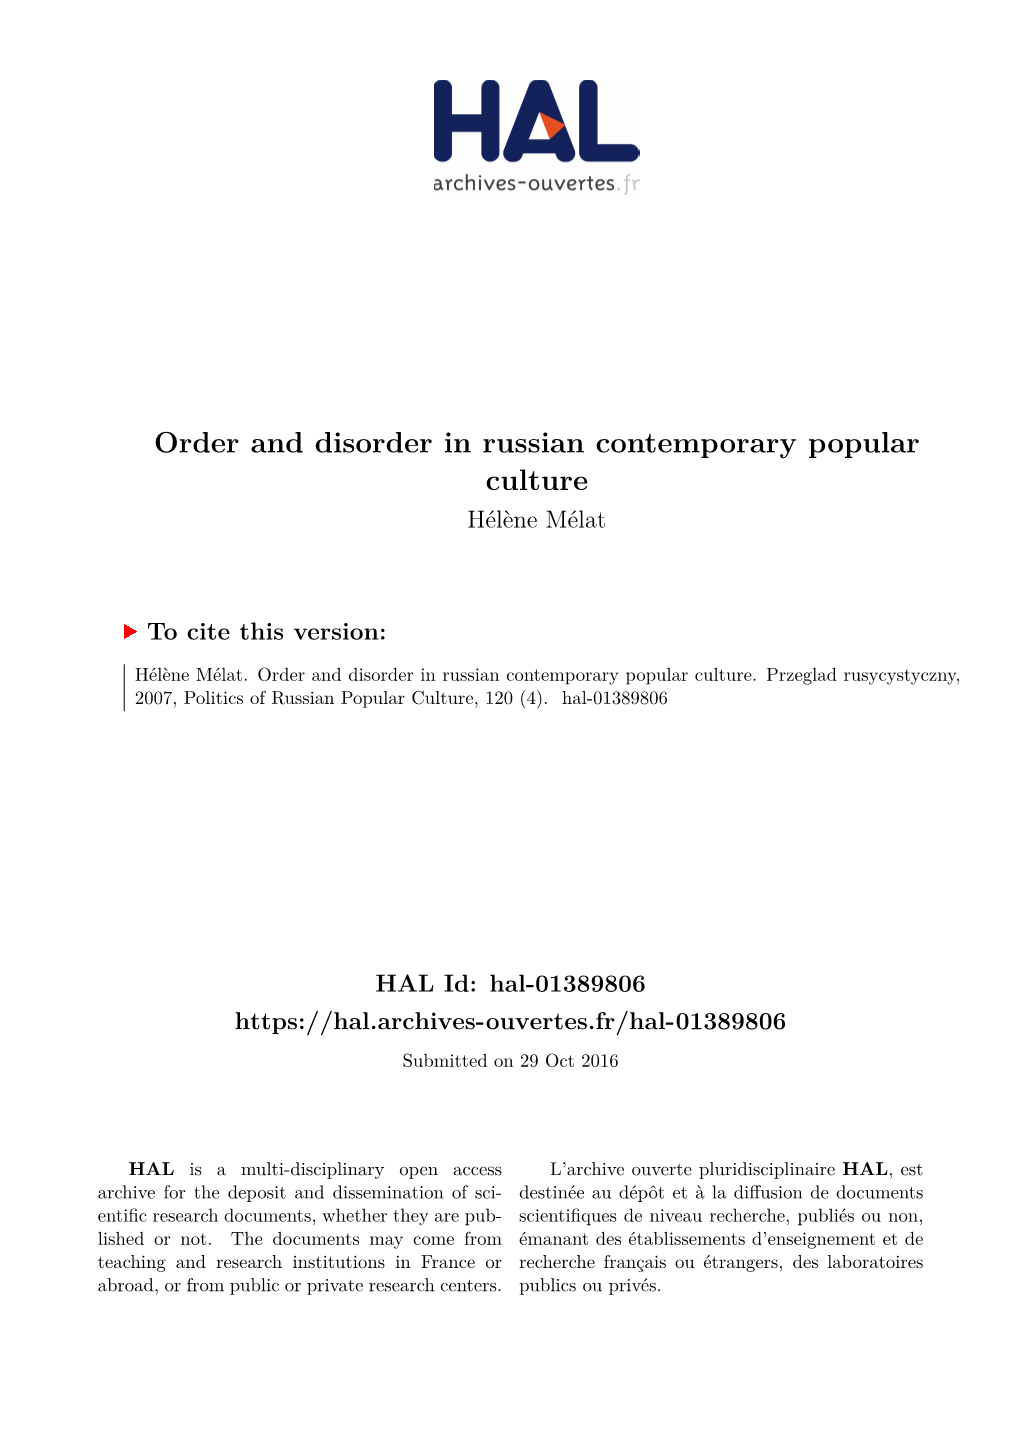 Order and Disorder in Russian Contemporary Popular Culture Hélène Mélat